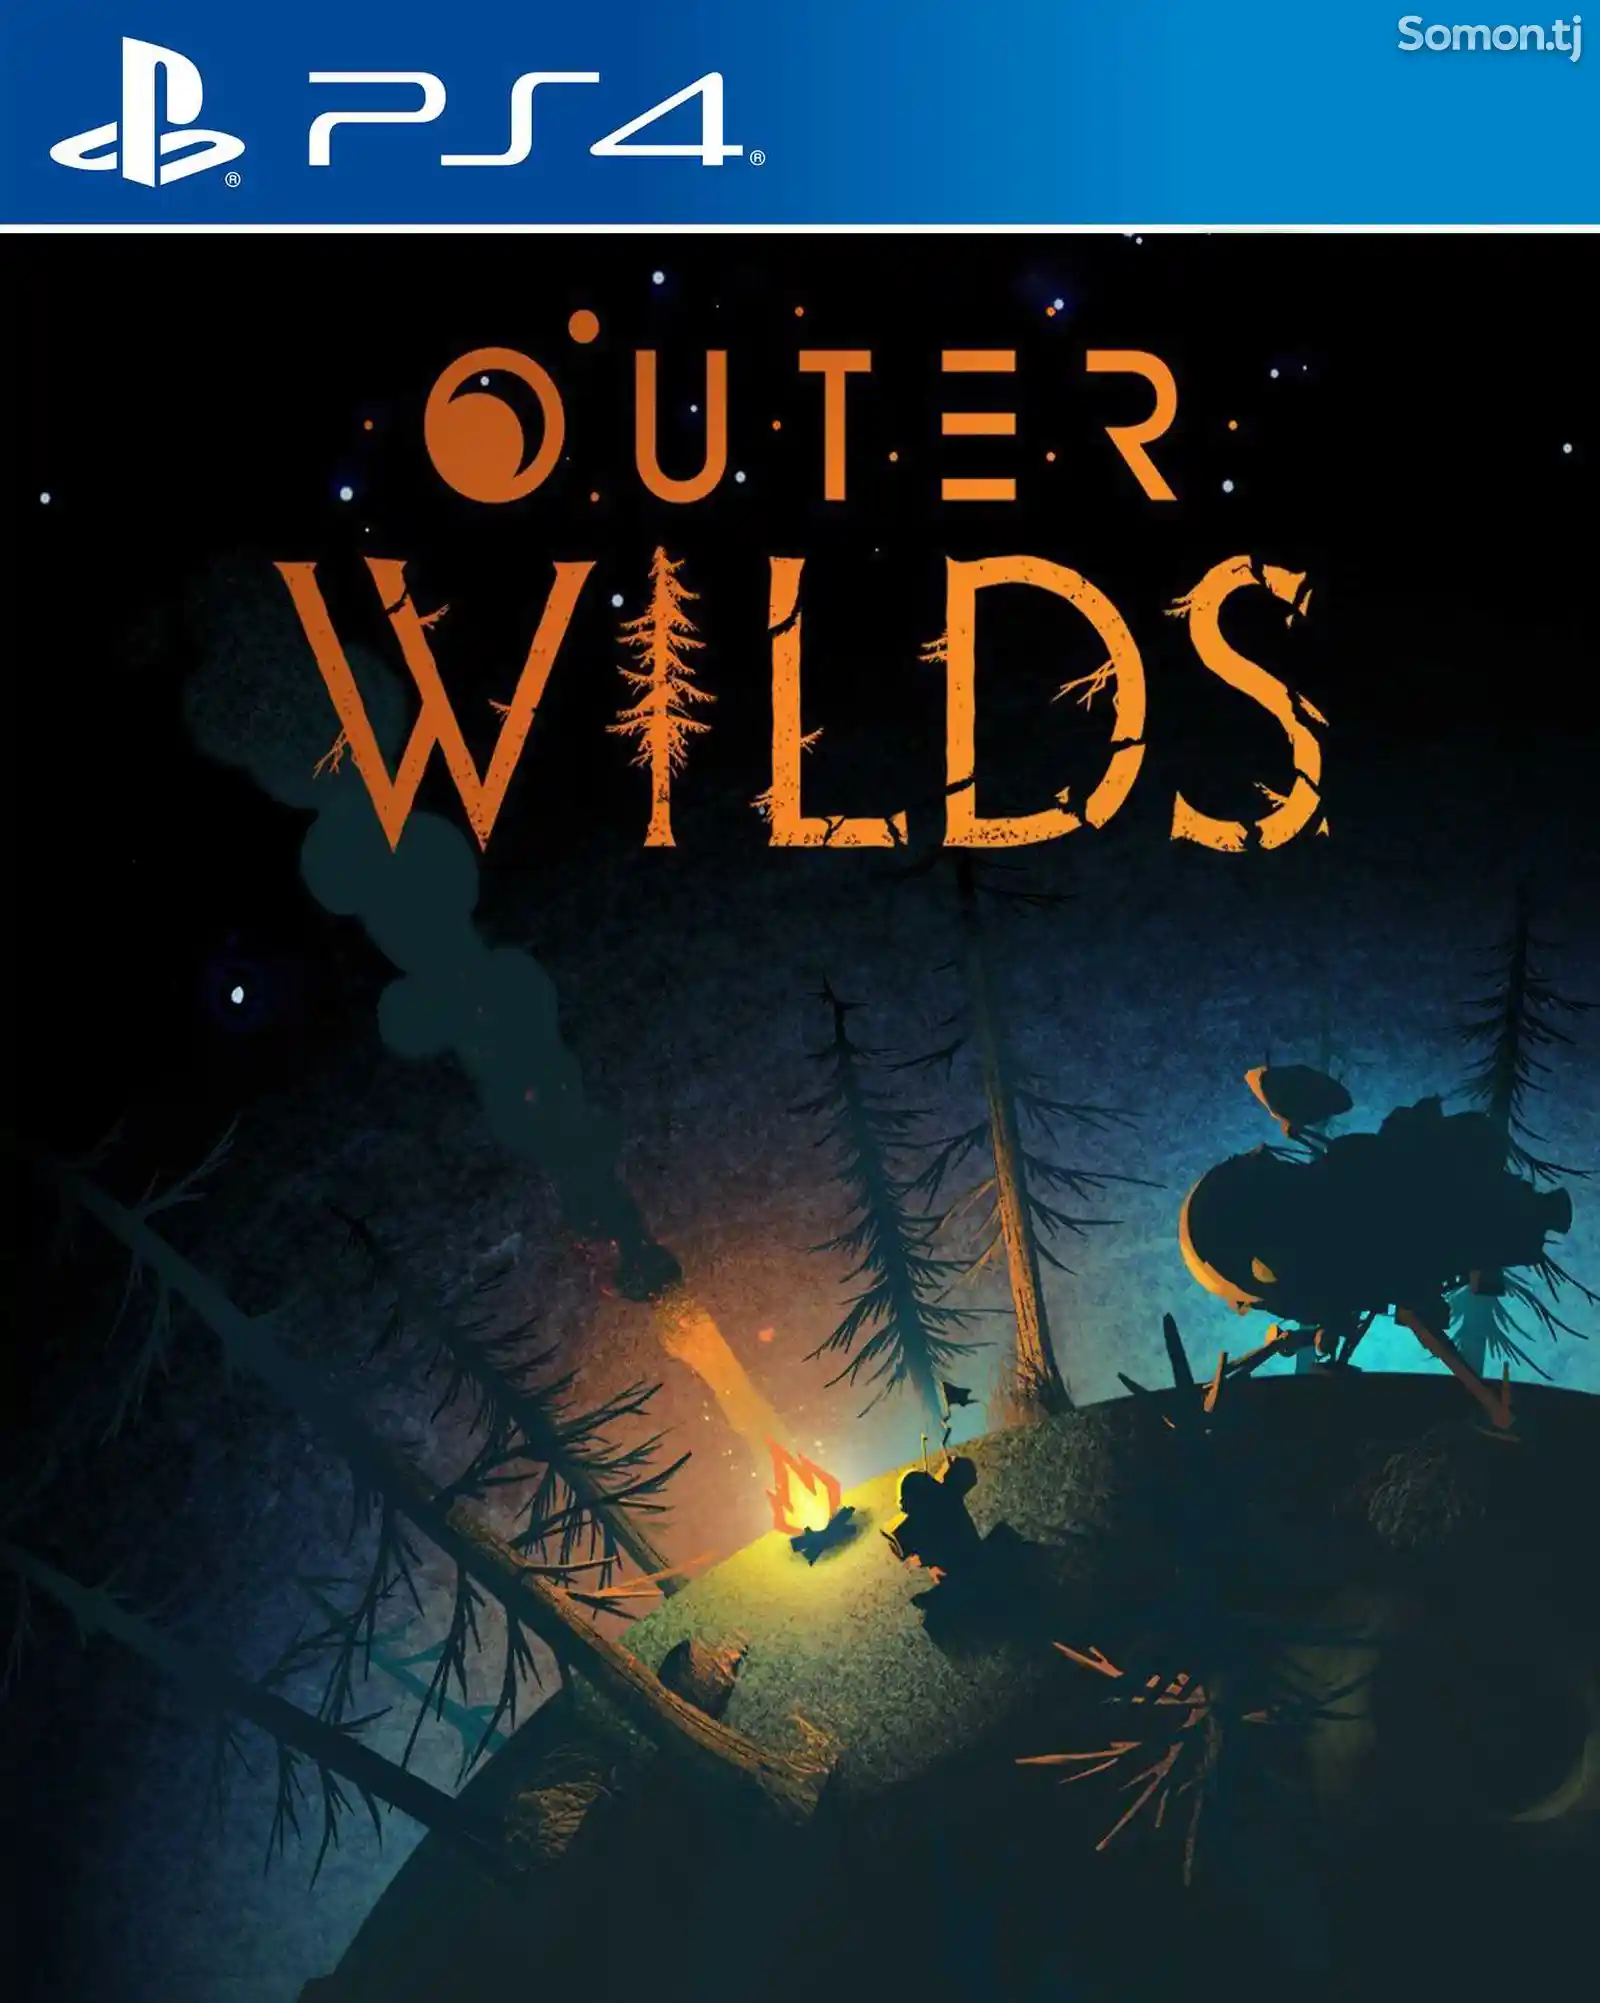 Игра Outer wilds для PS-4 / 5.05 / 6.72 / 7.02 / 7.55 / 9.00 /-1